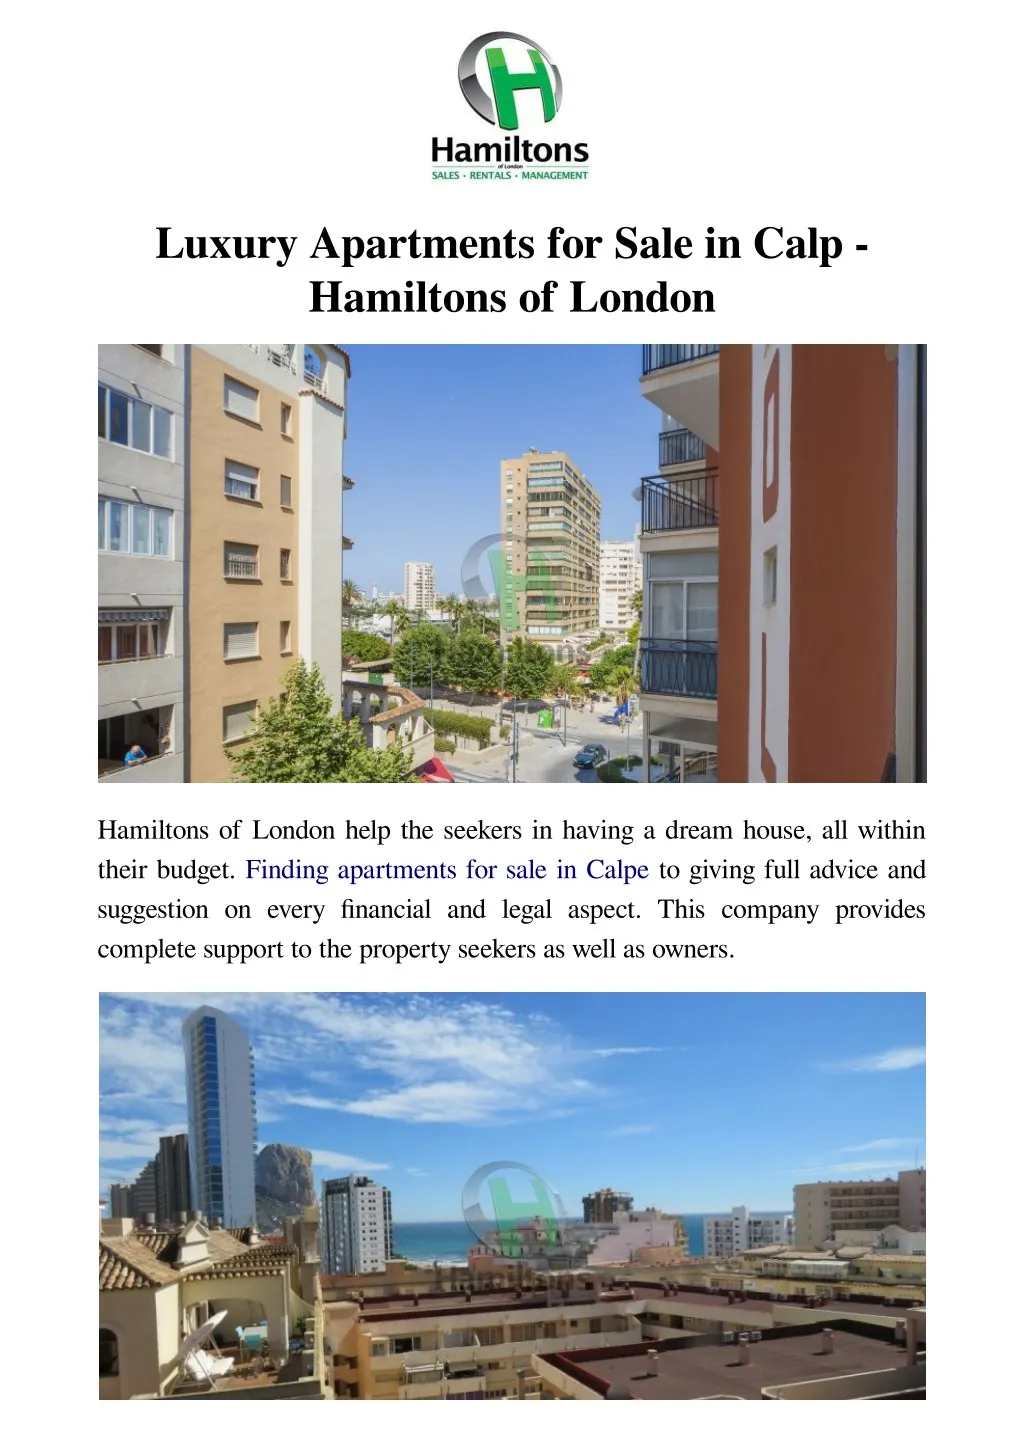 luxury apartments for sale in calp hamiltons